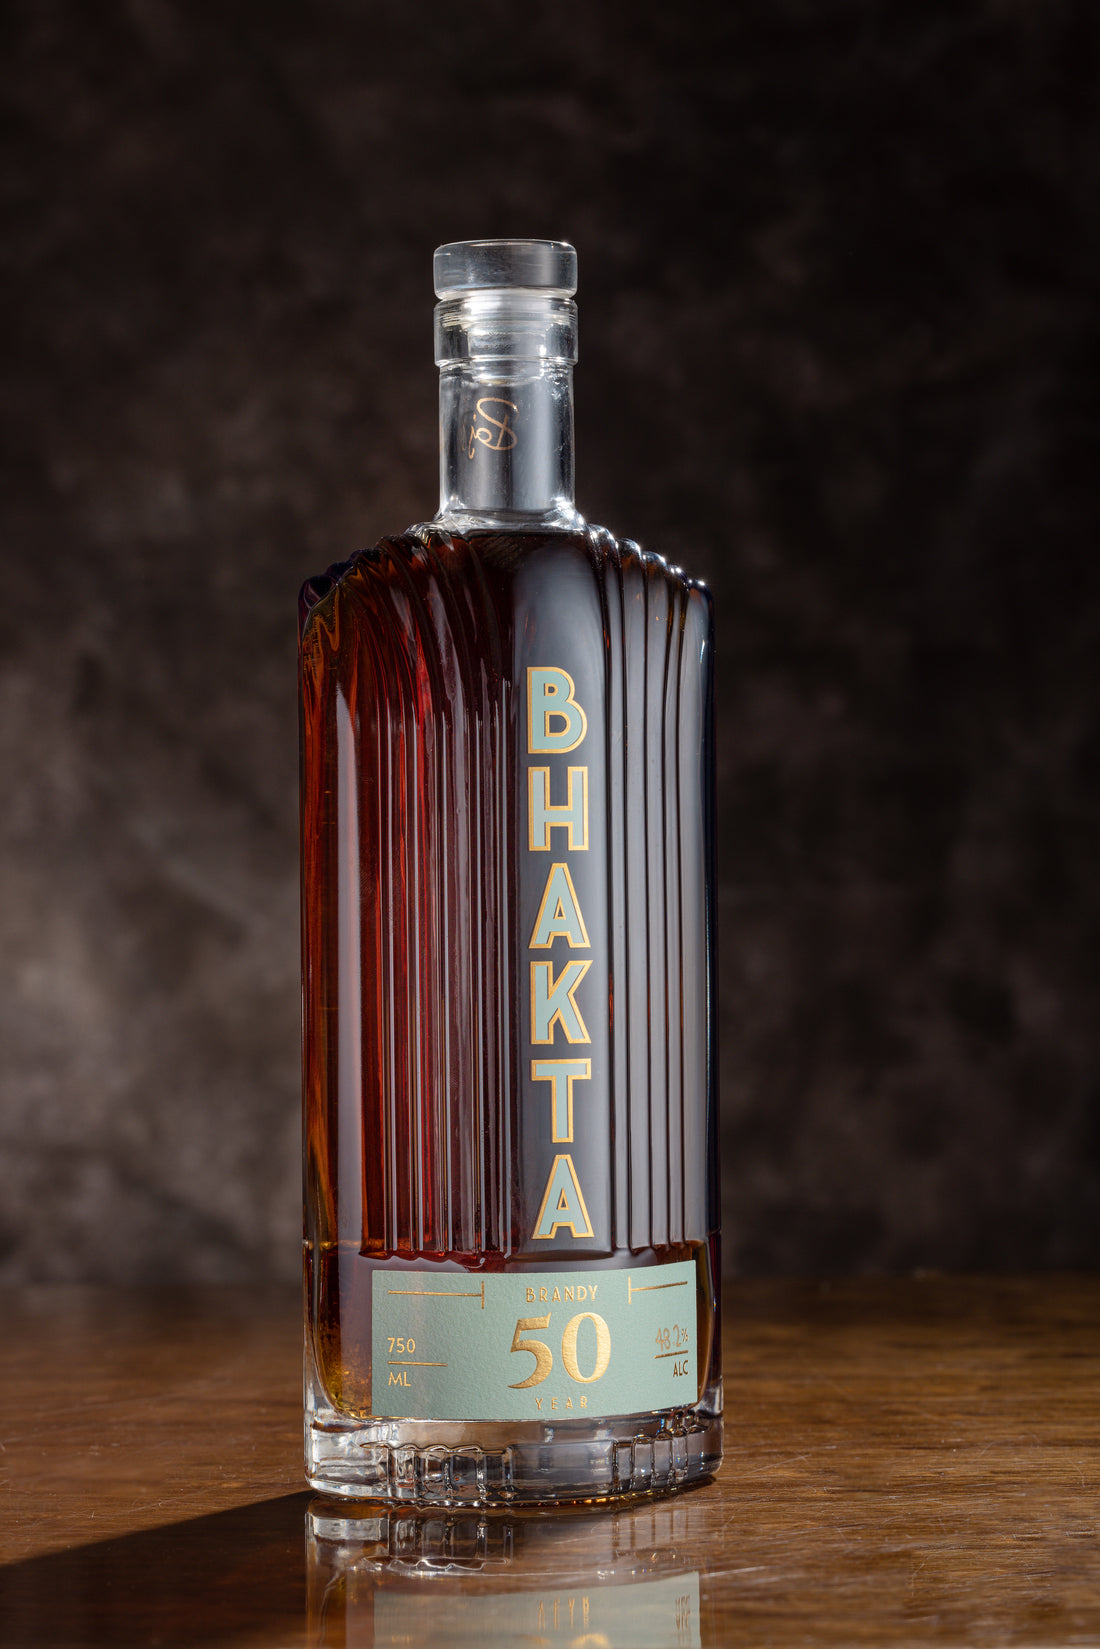 Previously Released BHAKTA 50 Bottles for sale